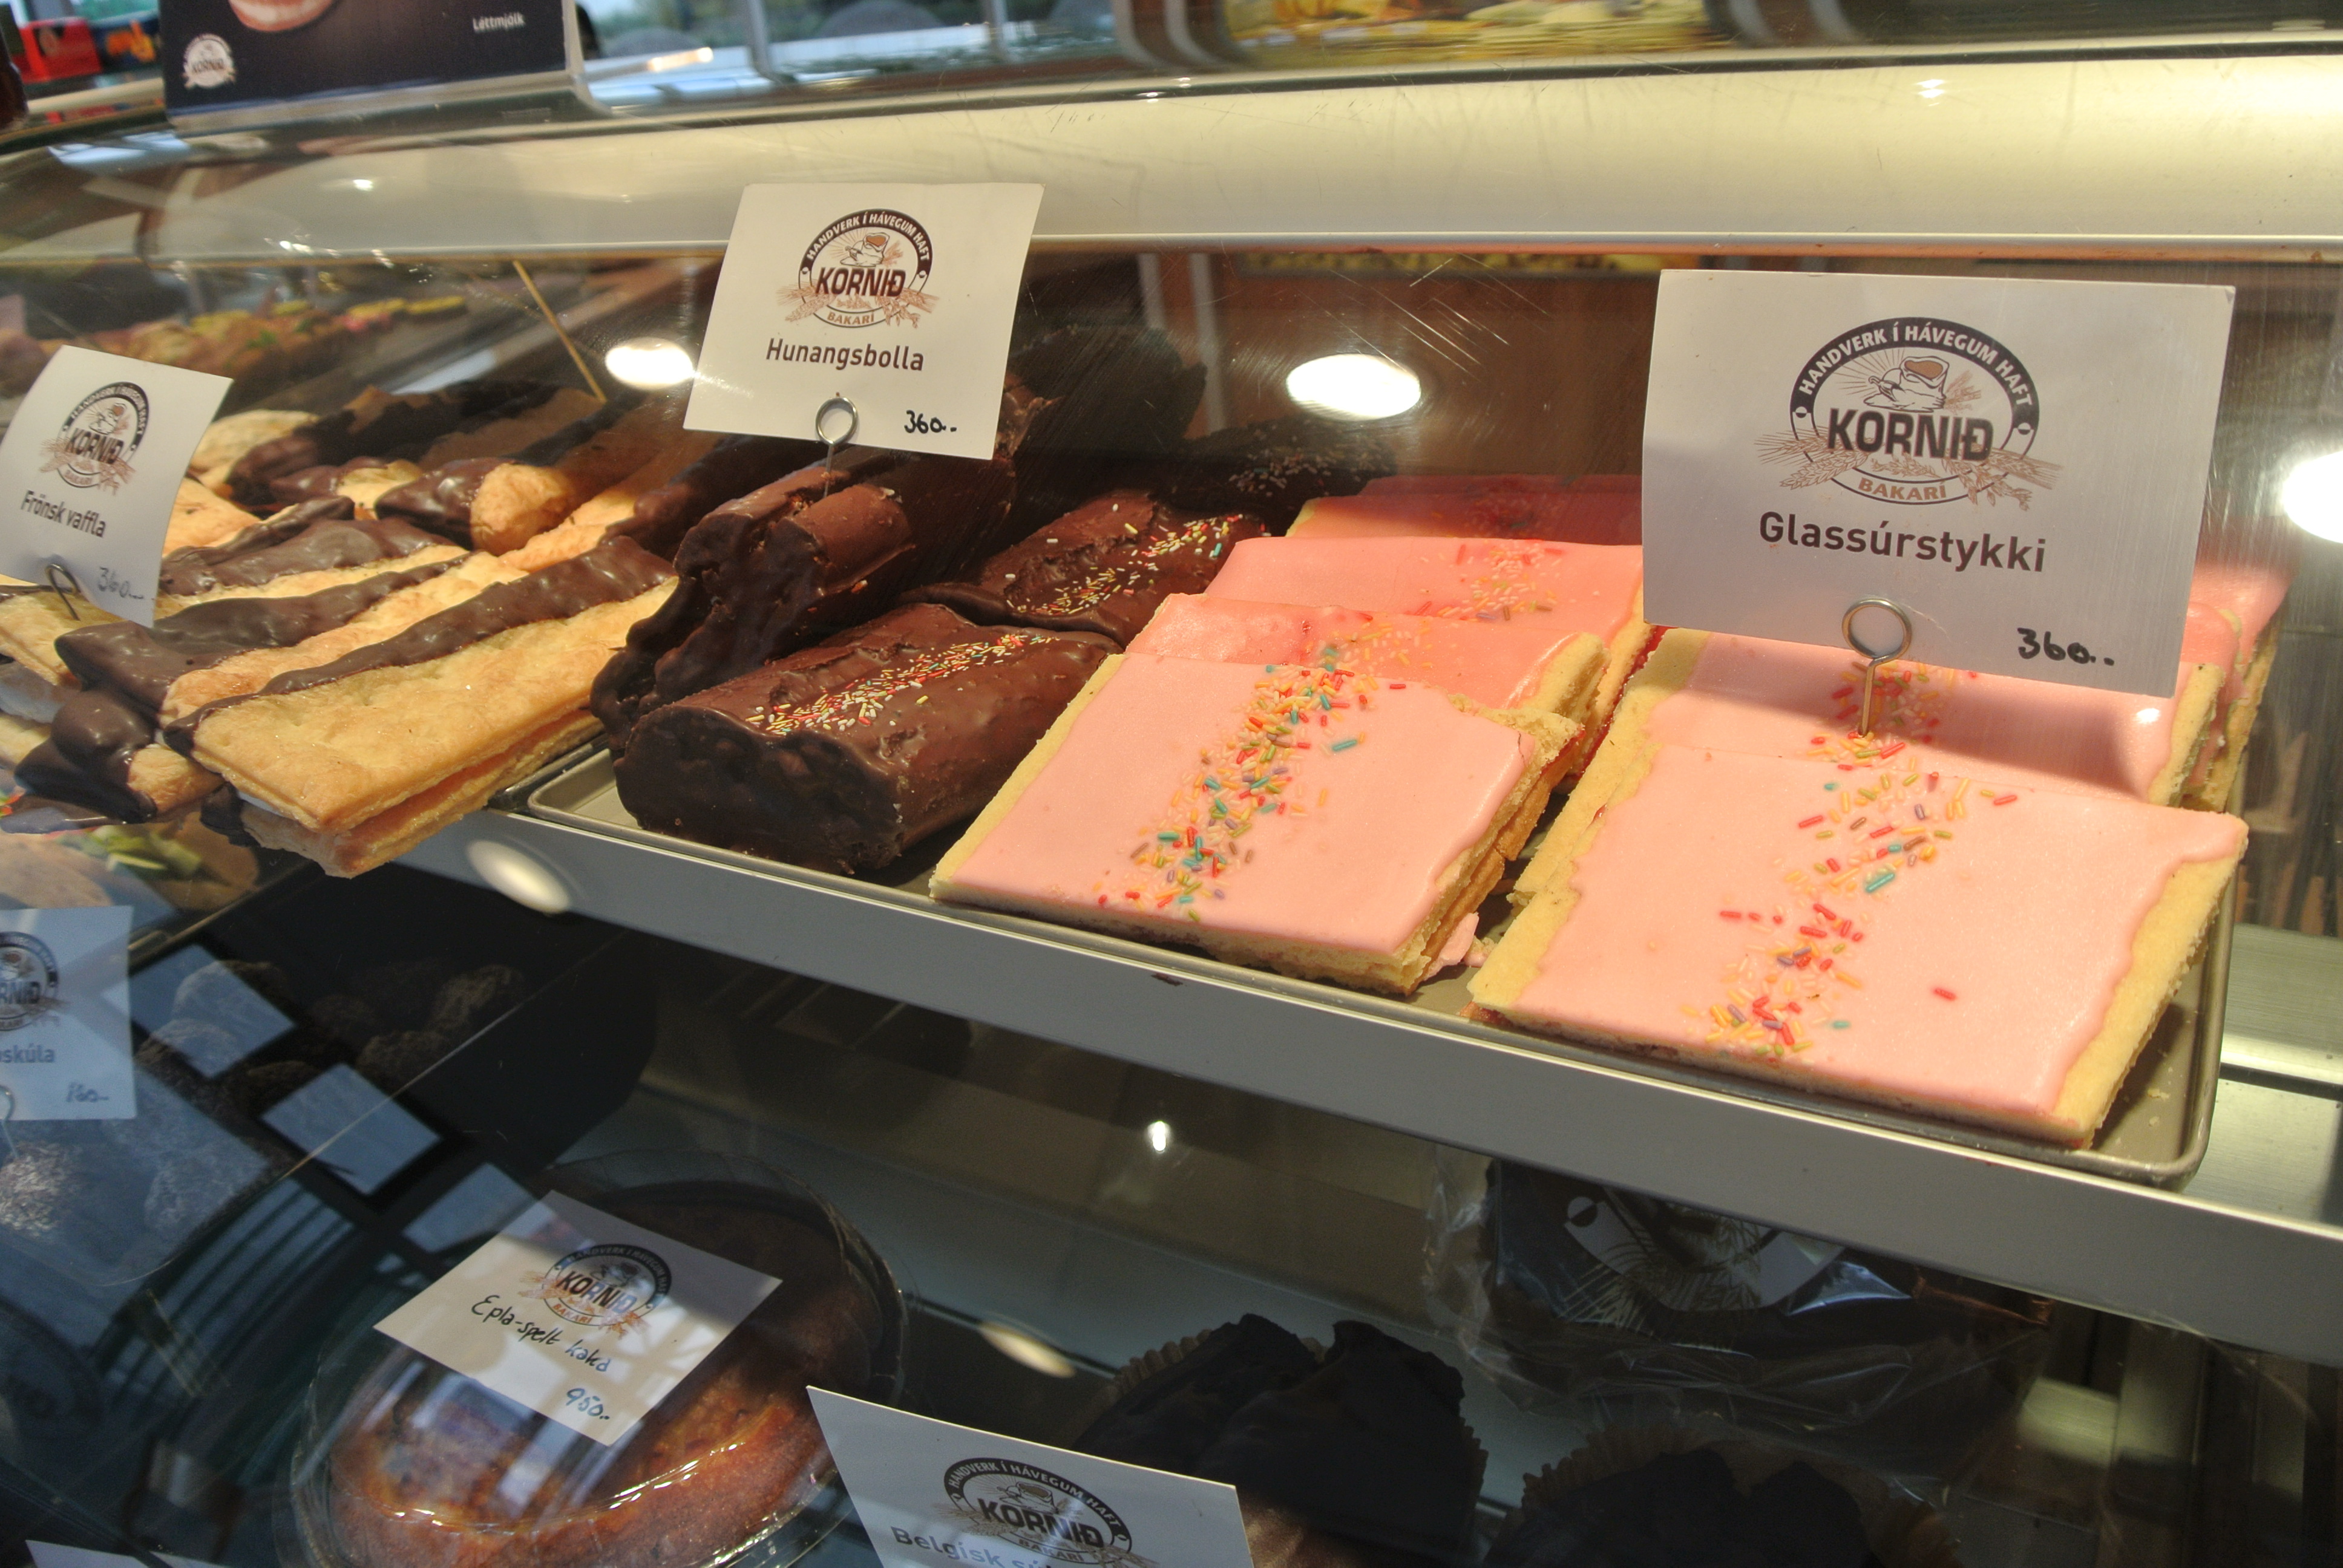 More interesting pastries - these look similar to homemade pop tarts!